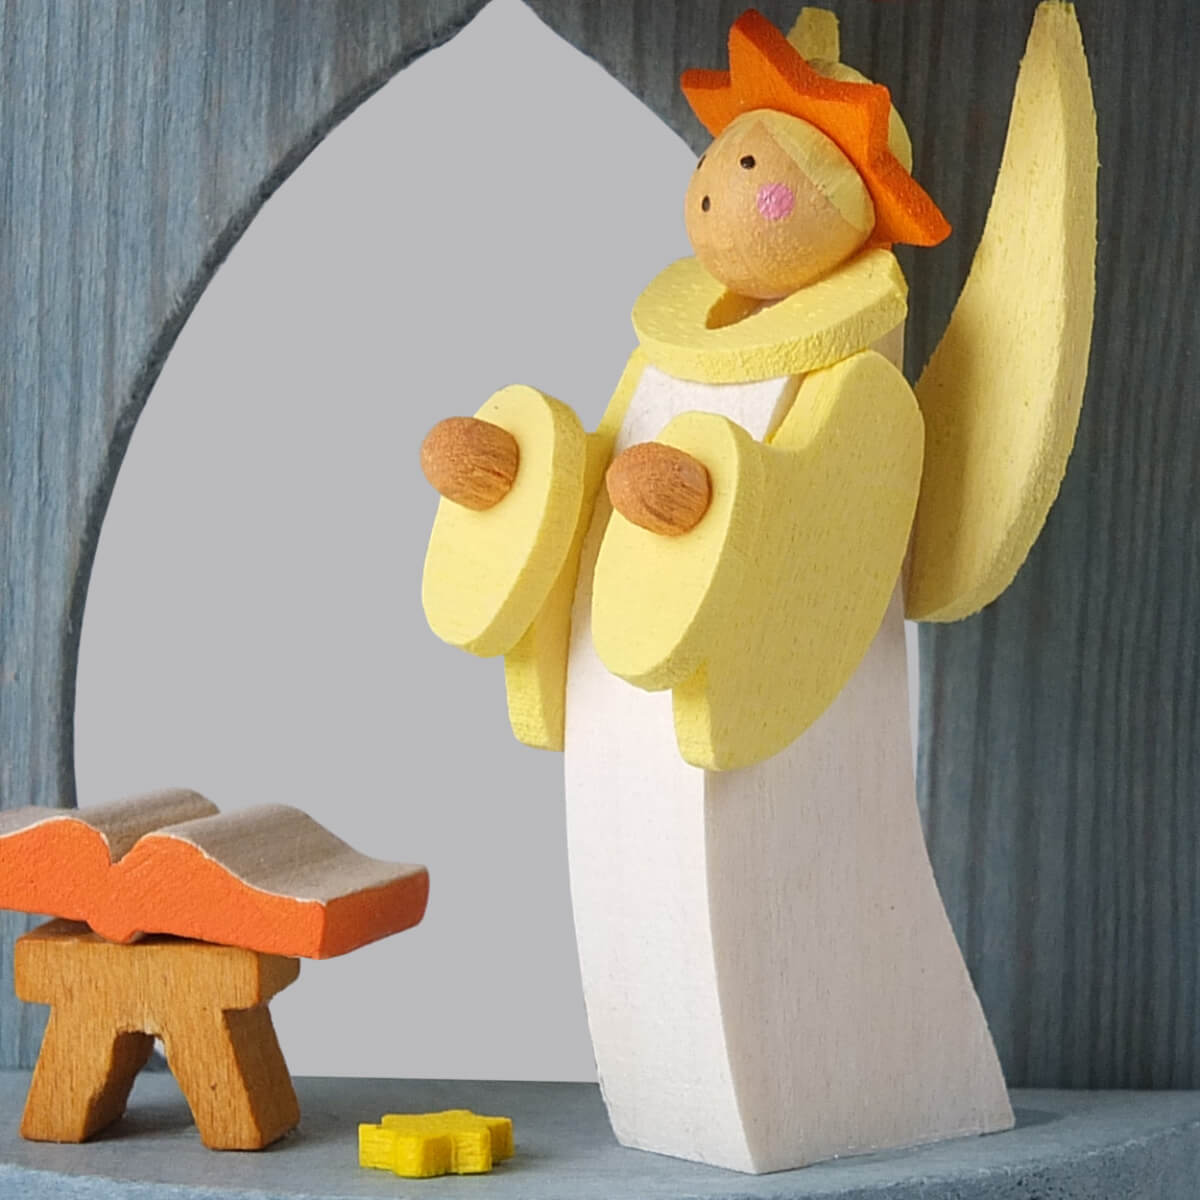 Manger 'The Nativity' Ornament with annunciation angel